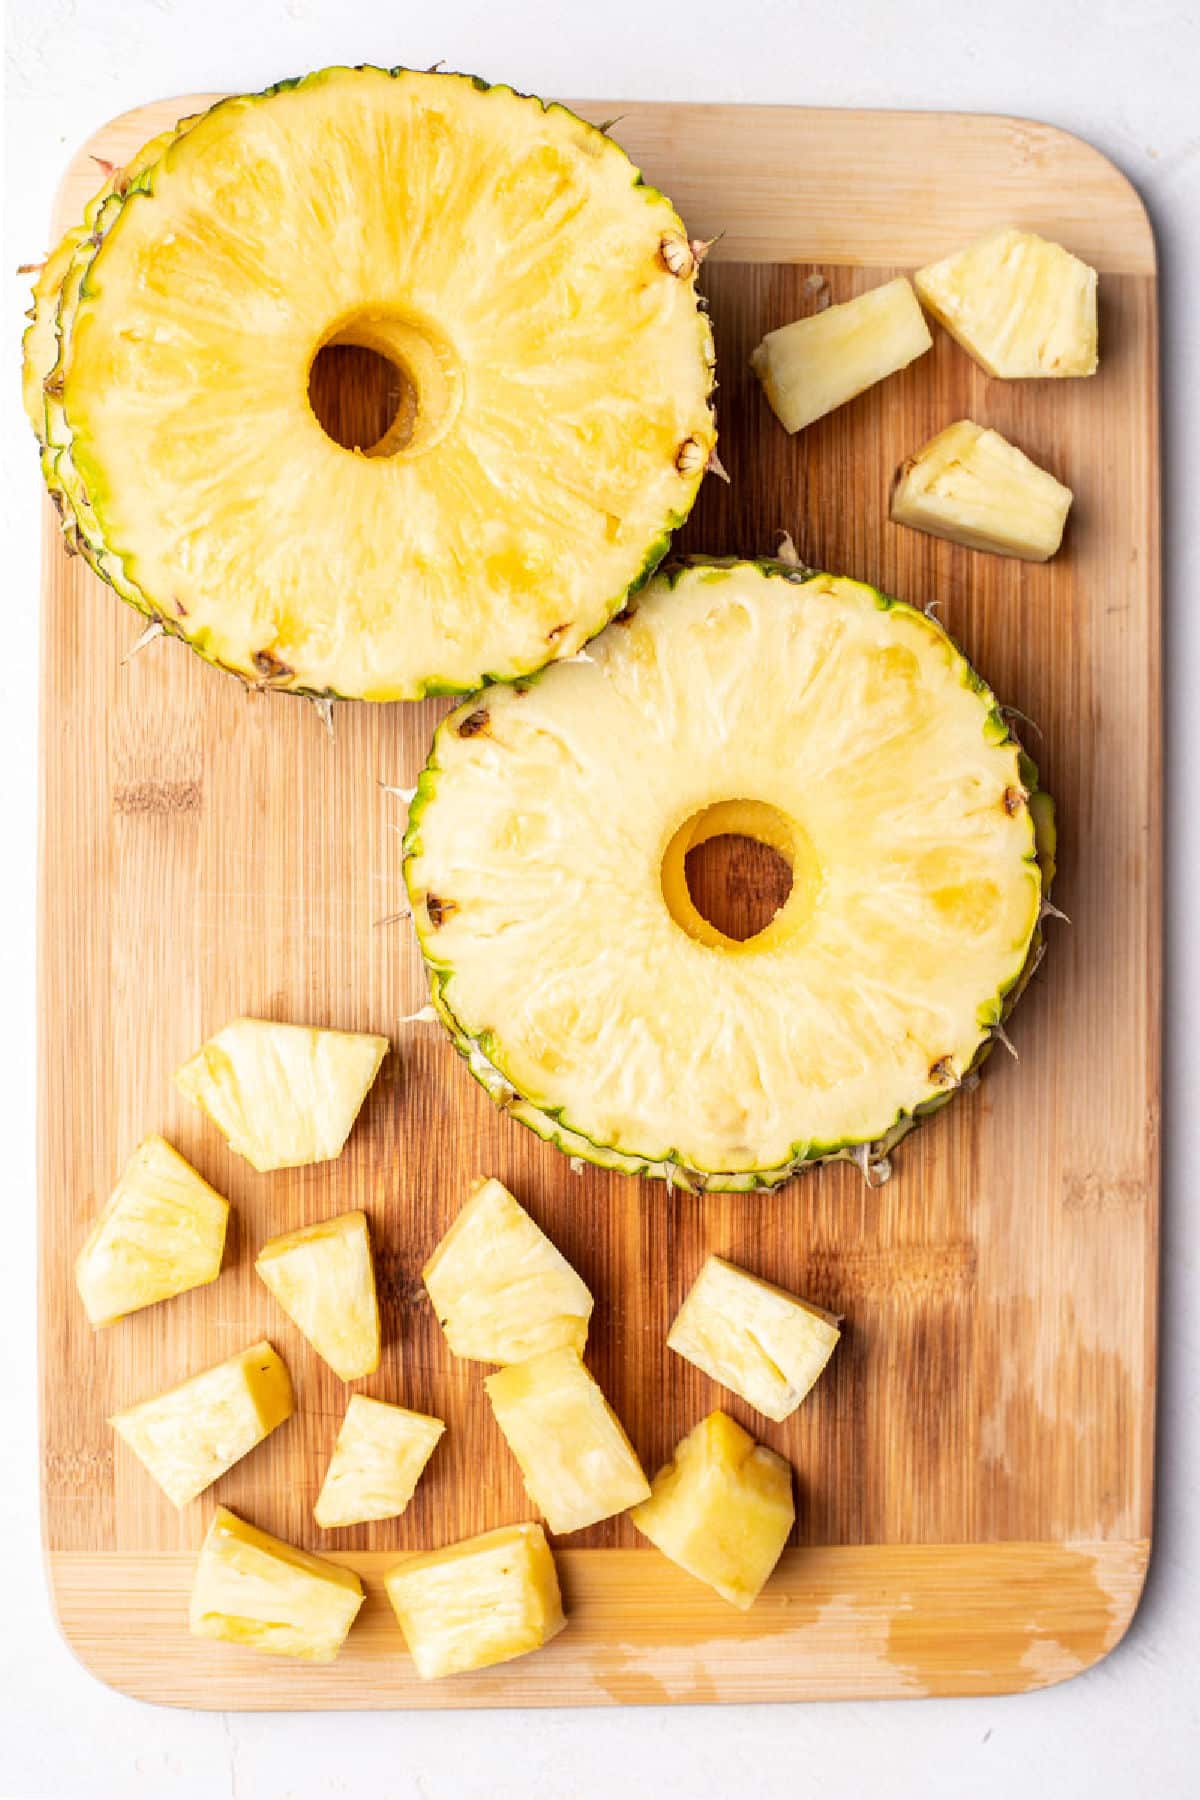 Sliced fresh pineapple rings and pineapple chunks on a wooden cutting board. 